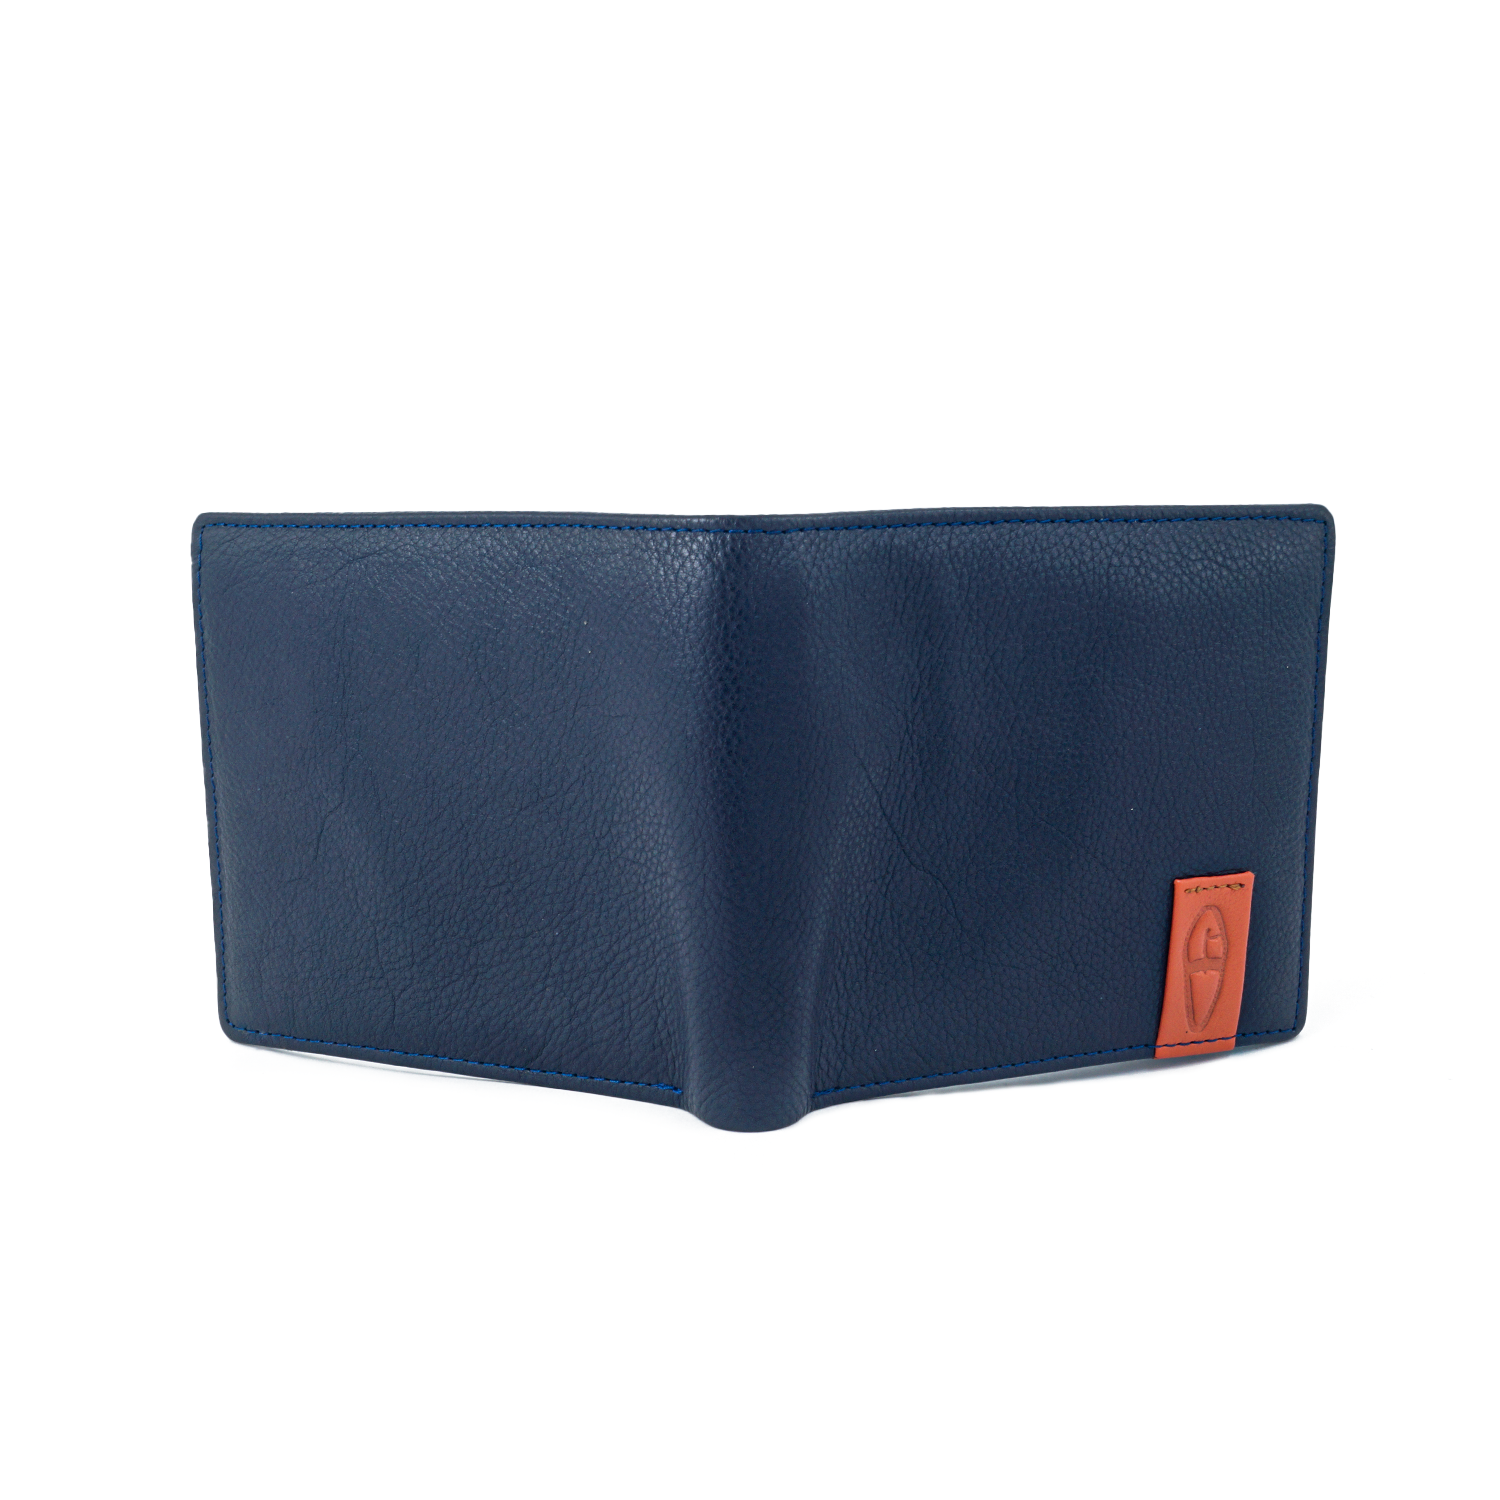 Style Guardian: Premium NAPPA Leather Wallet with RFID Protection for Men - Blue